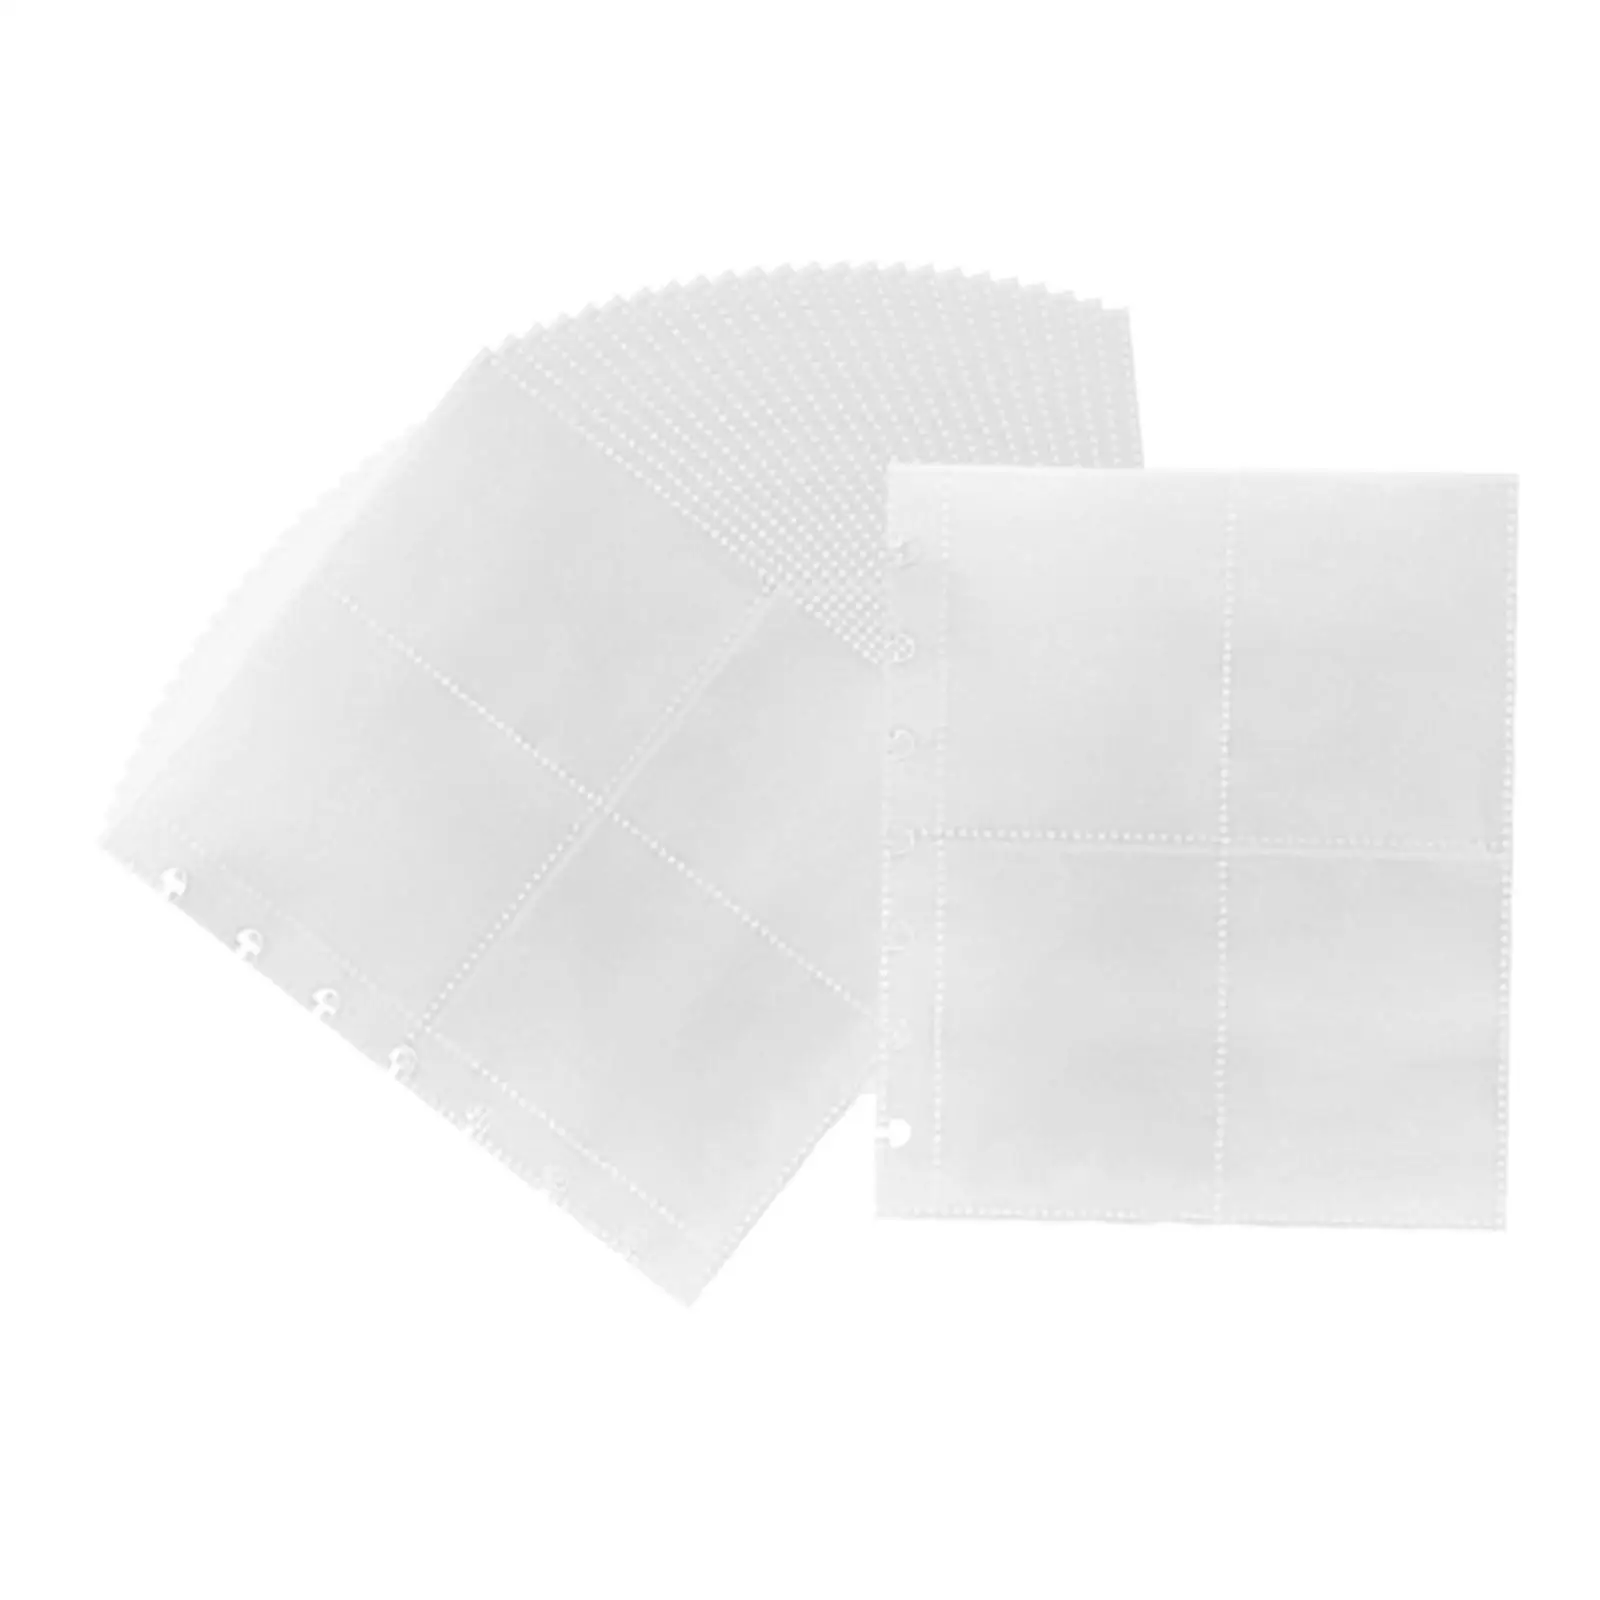 Clear Trading Card Pages Sleeves Protective Cover Card Sleeves Binder Sheets Card Binder Card Sheets Protectors for Game Cards